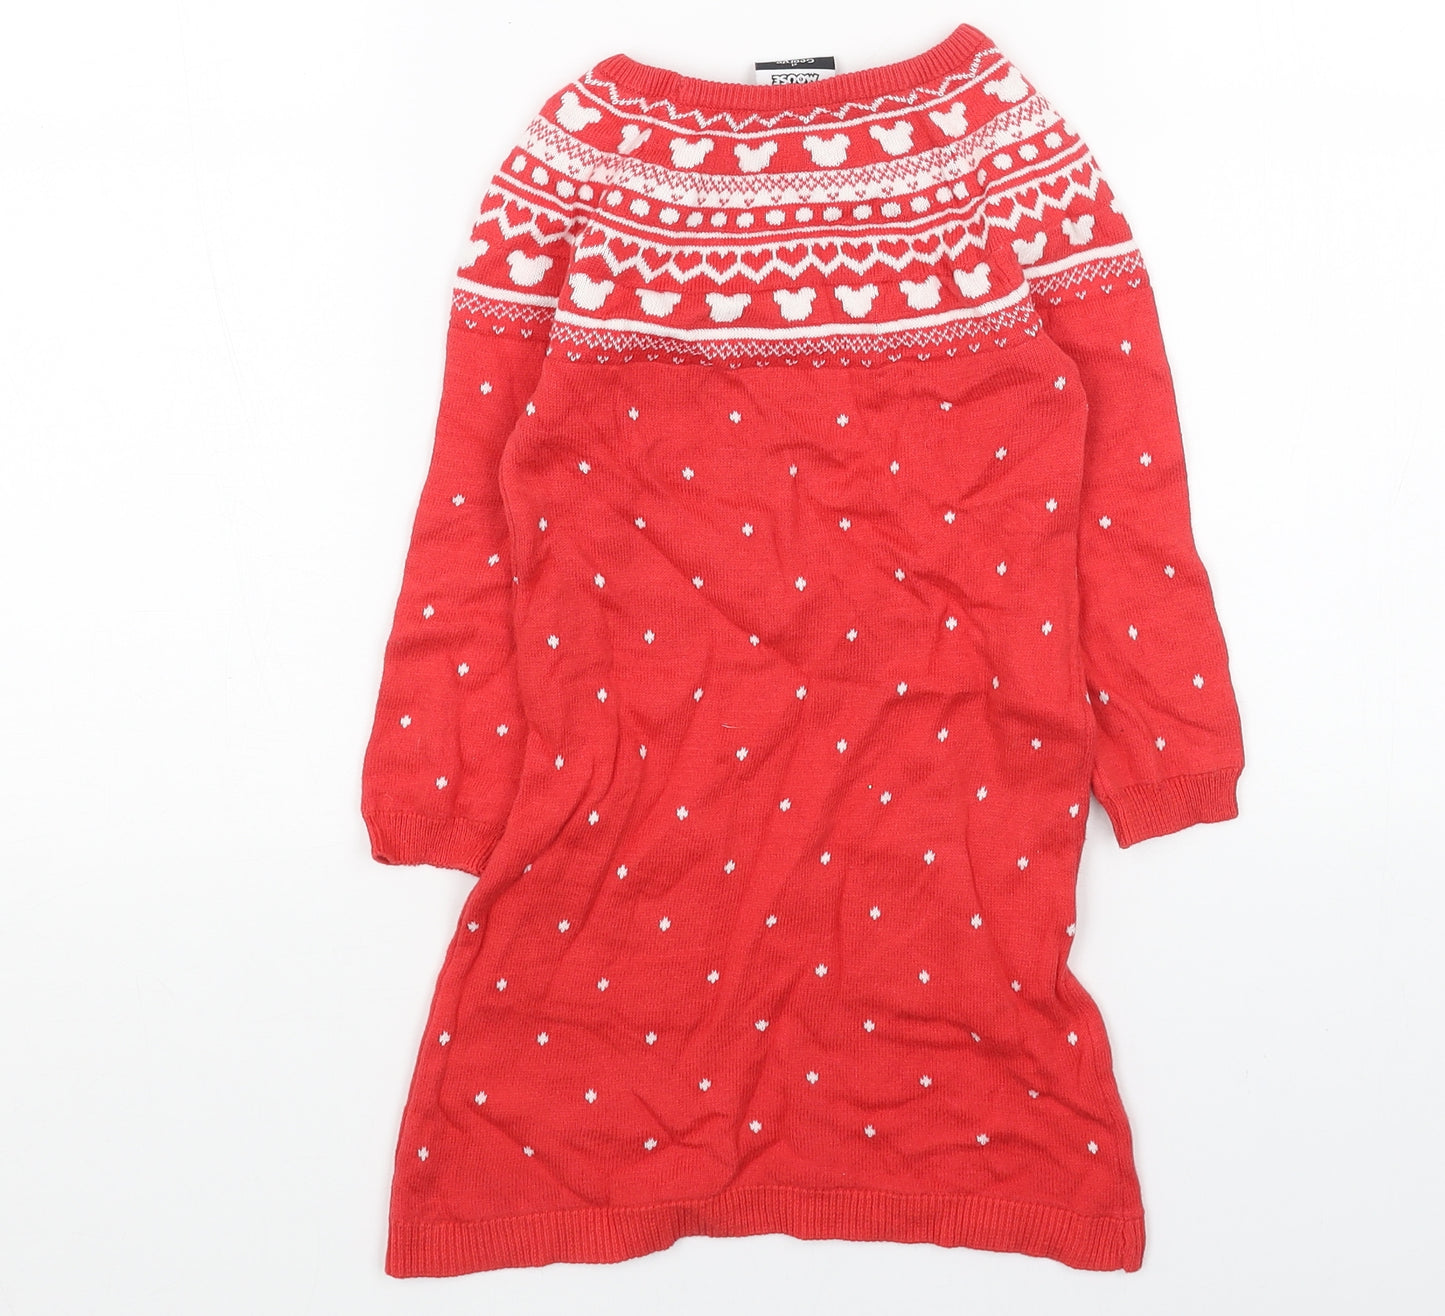 George Girls Red Geometric Acrylic Jumper Dress Size 2-3 Years Boat Neck Pullover - Minnie Mouse